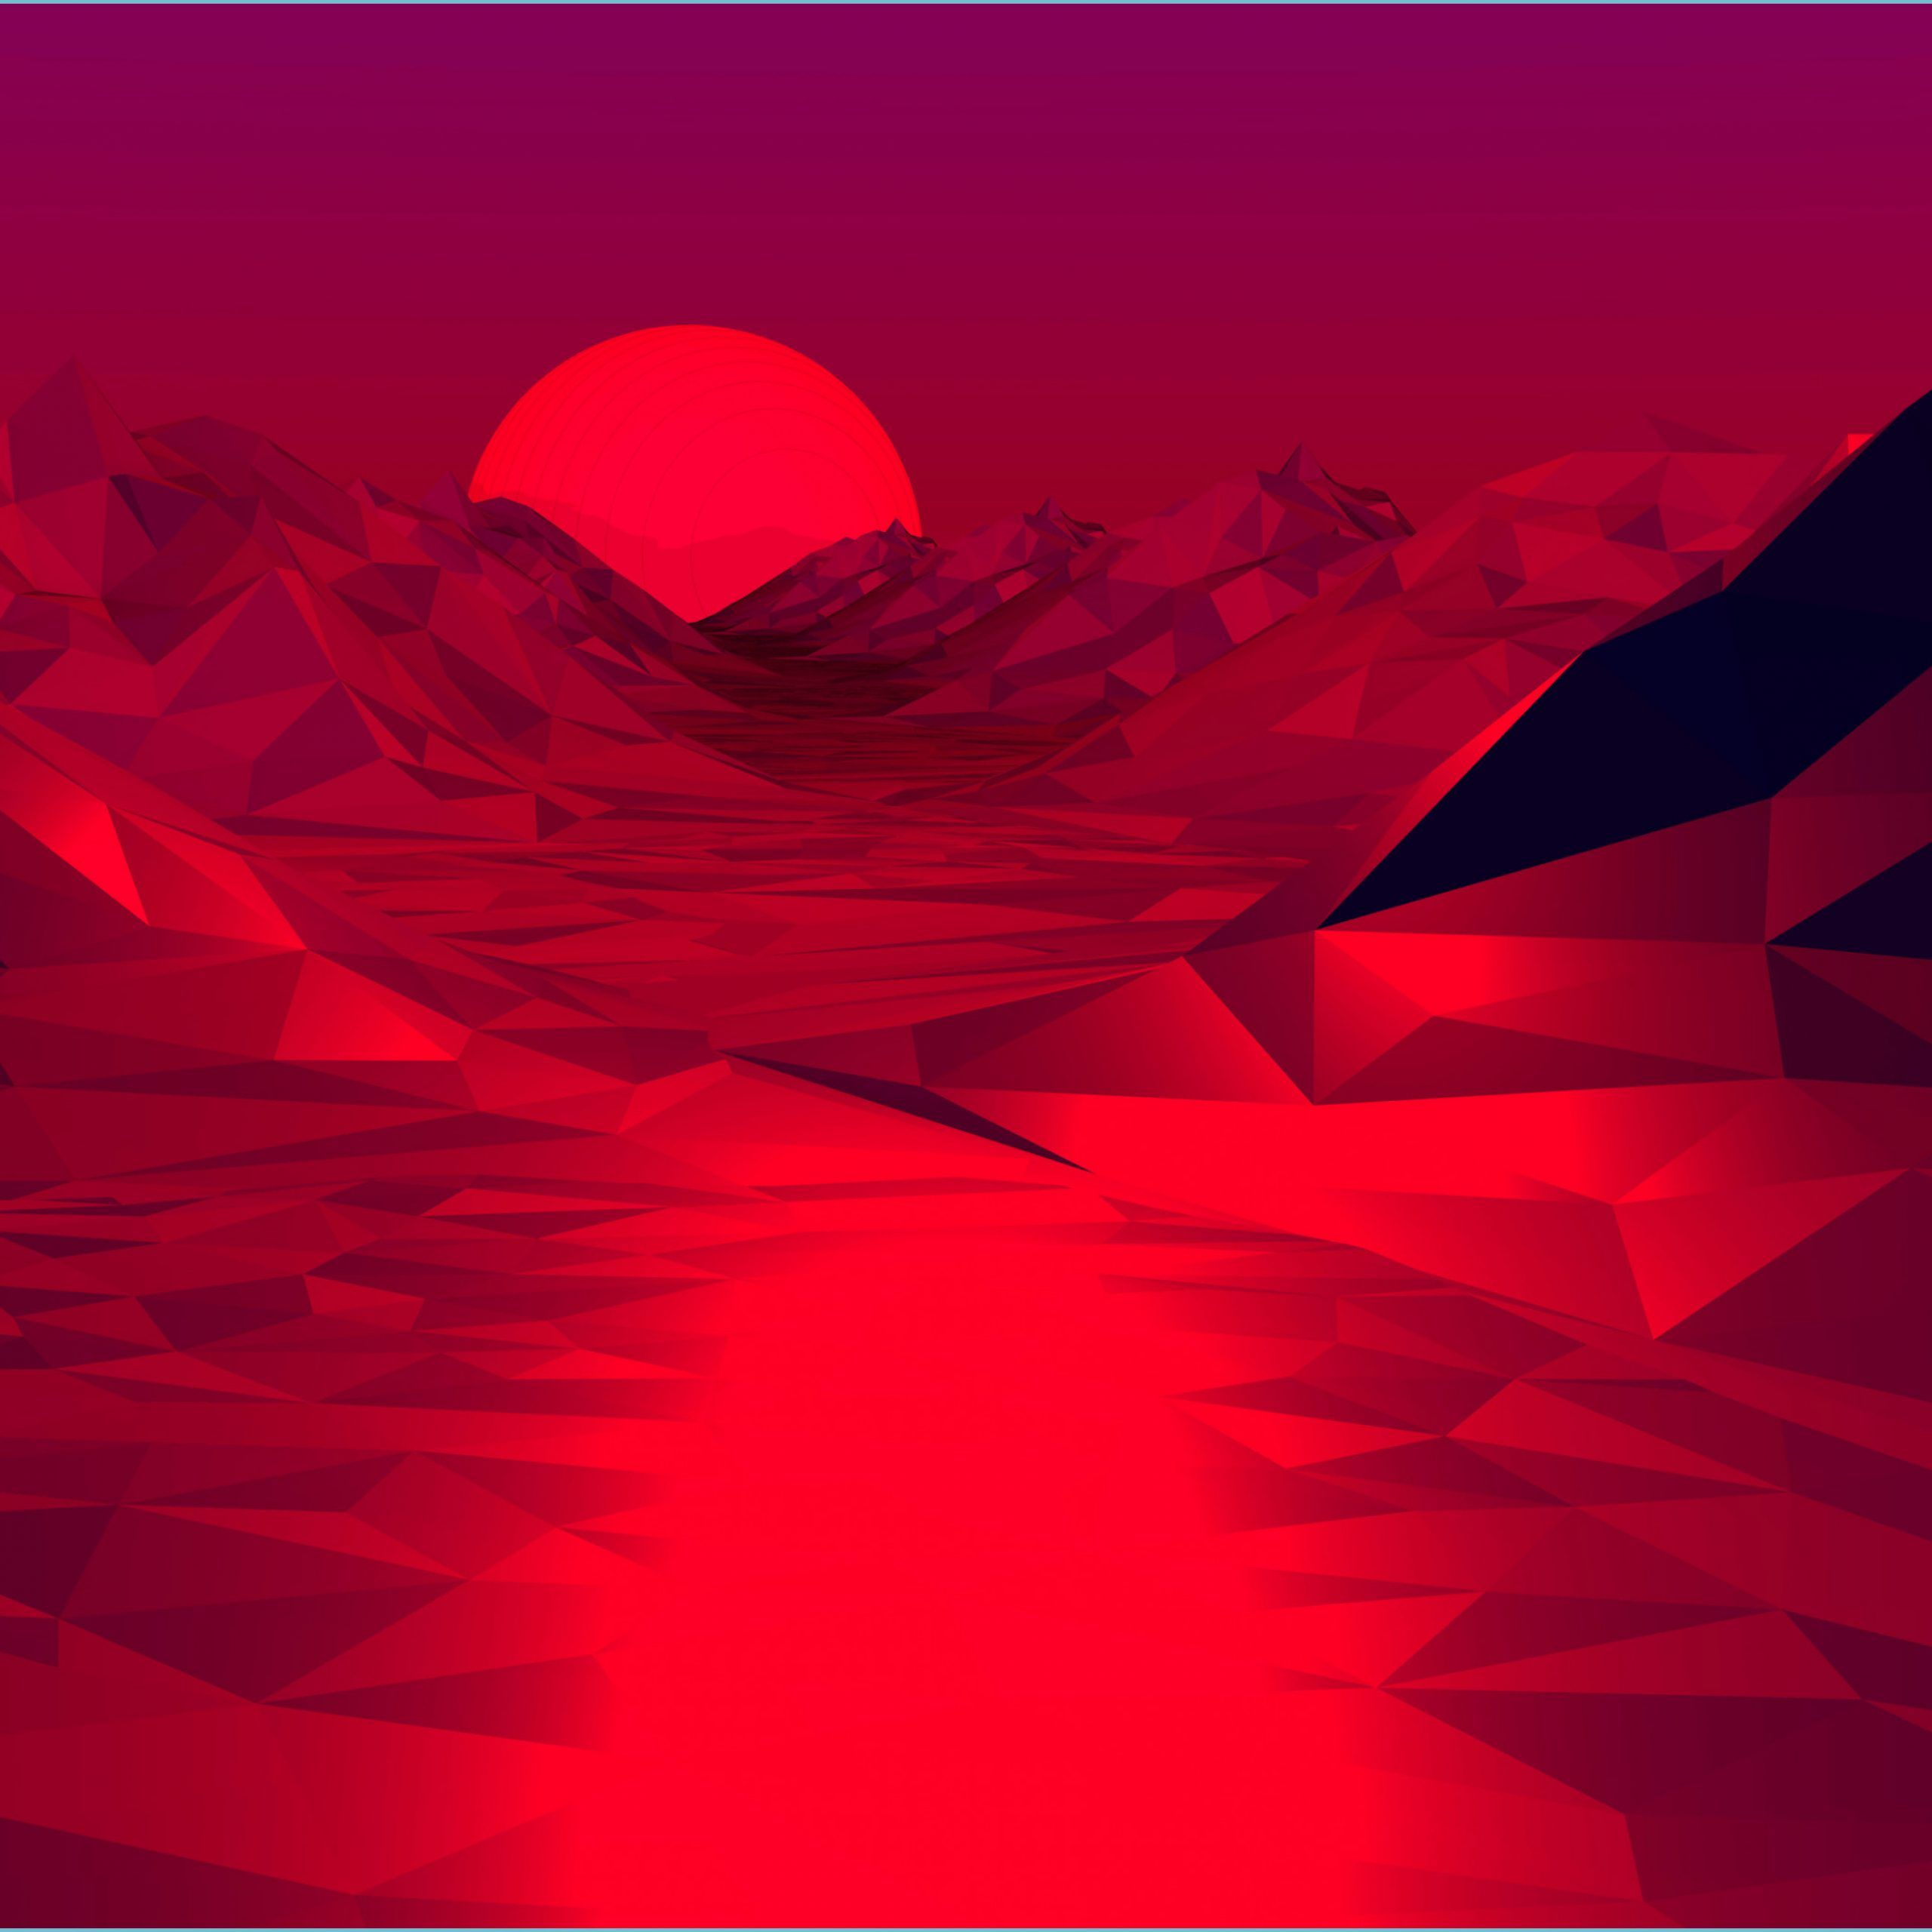 Low Poly Red 11d Abstract 11k, HD Abstract, 11k Wallpaper, Image Wallpaper 4k